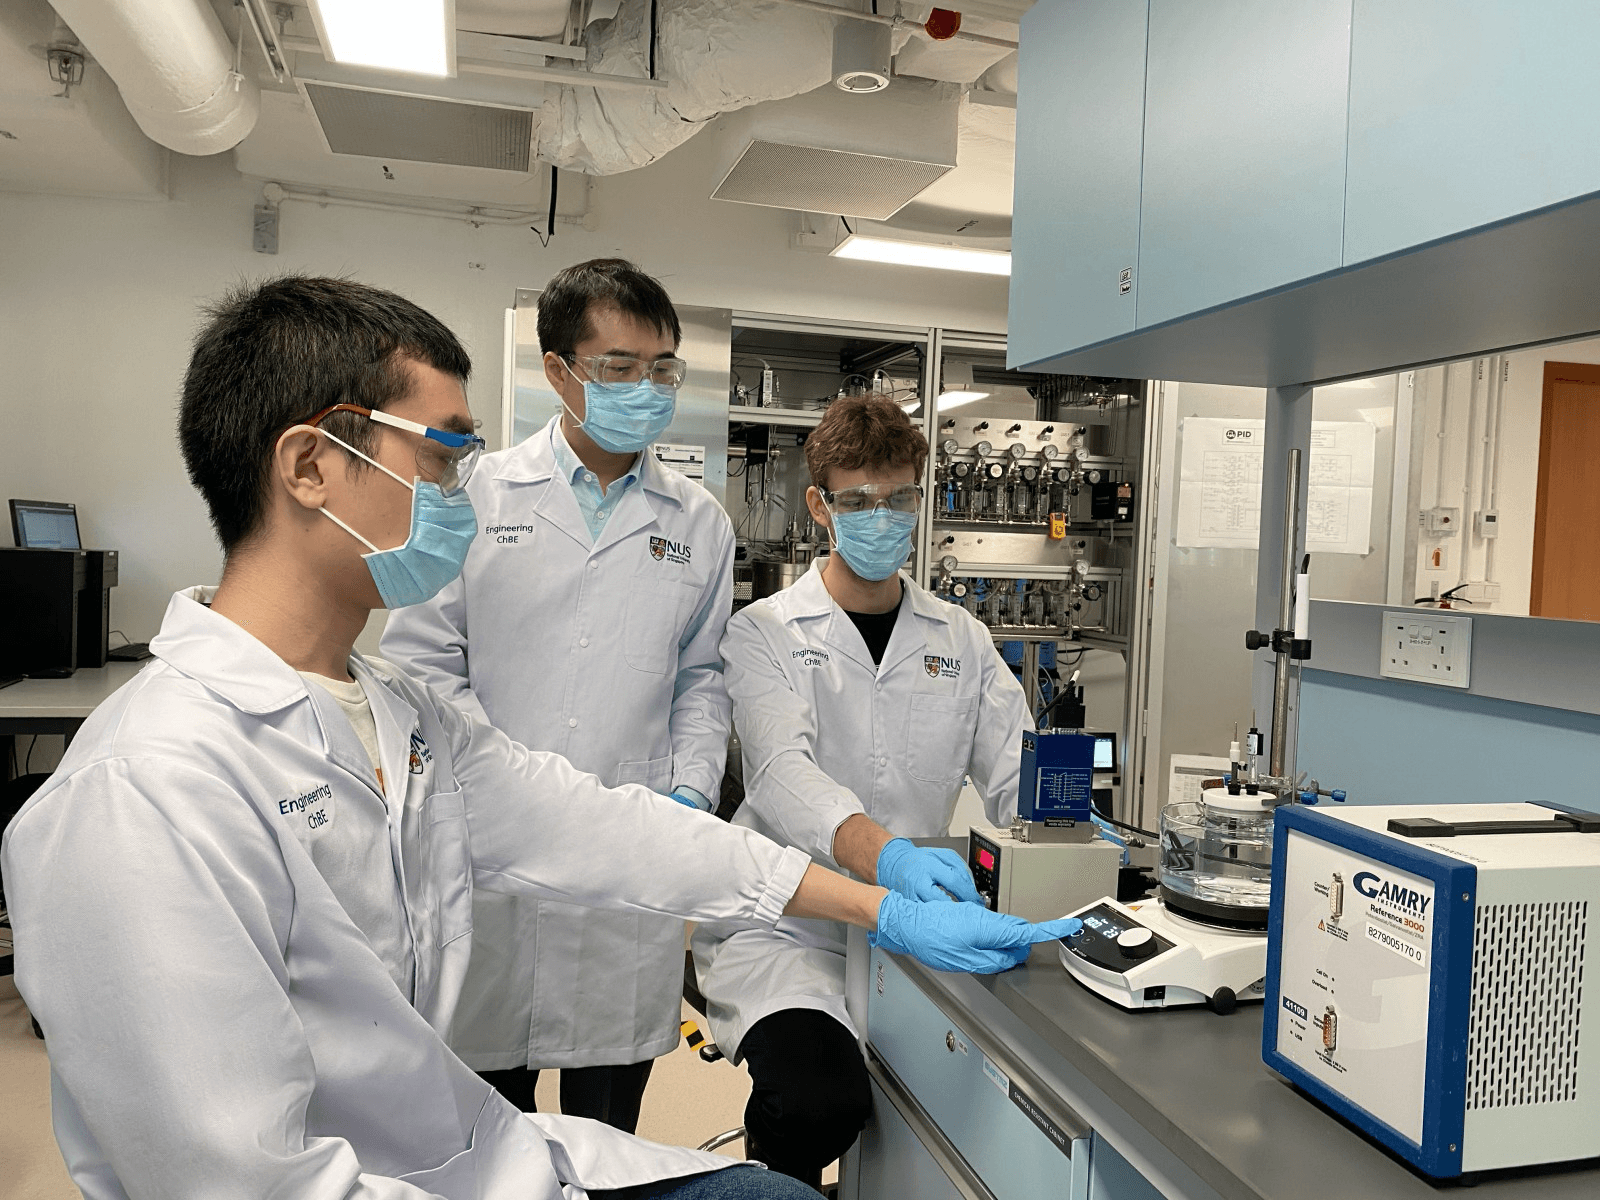 The NUS research team led by Assoc Prof Yan Ning (middle) with doctoral student Mr Lim Chia Wei (left), and Research Fellow Dr Max Hulsey (right).